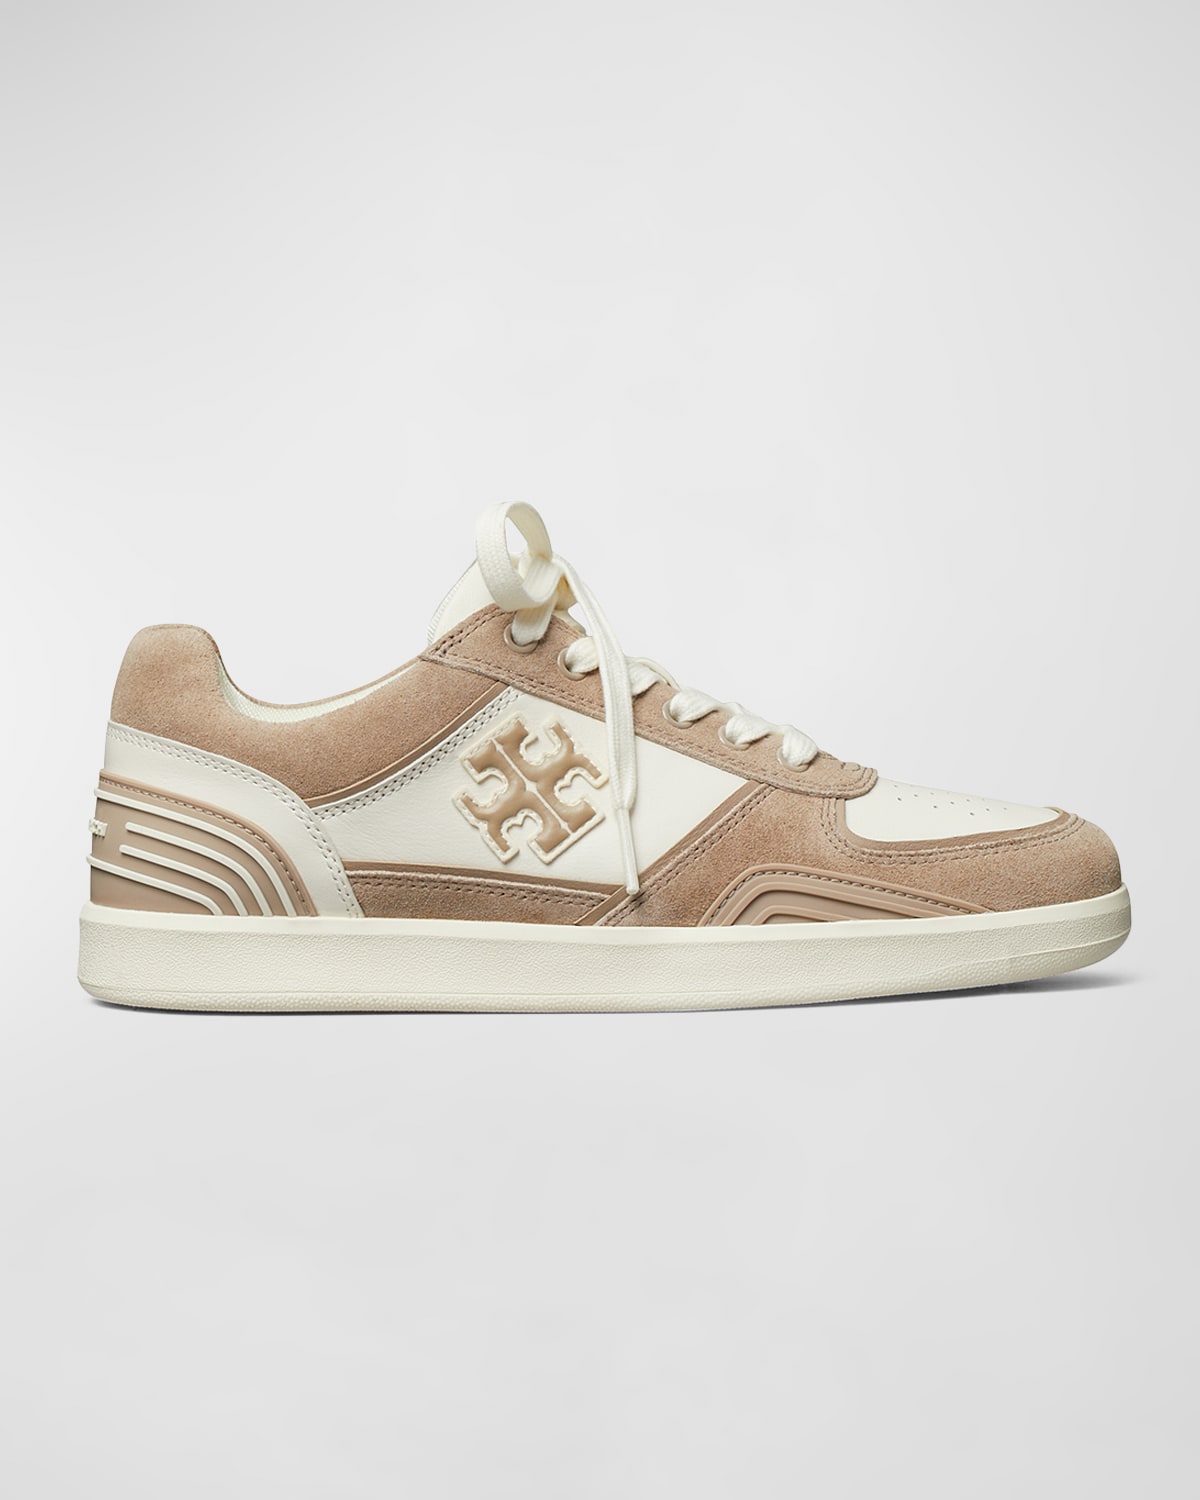 TORY BURCH CLOVER MIXED LEATHER LOW-TOP SNEAKERS